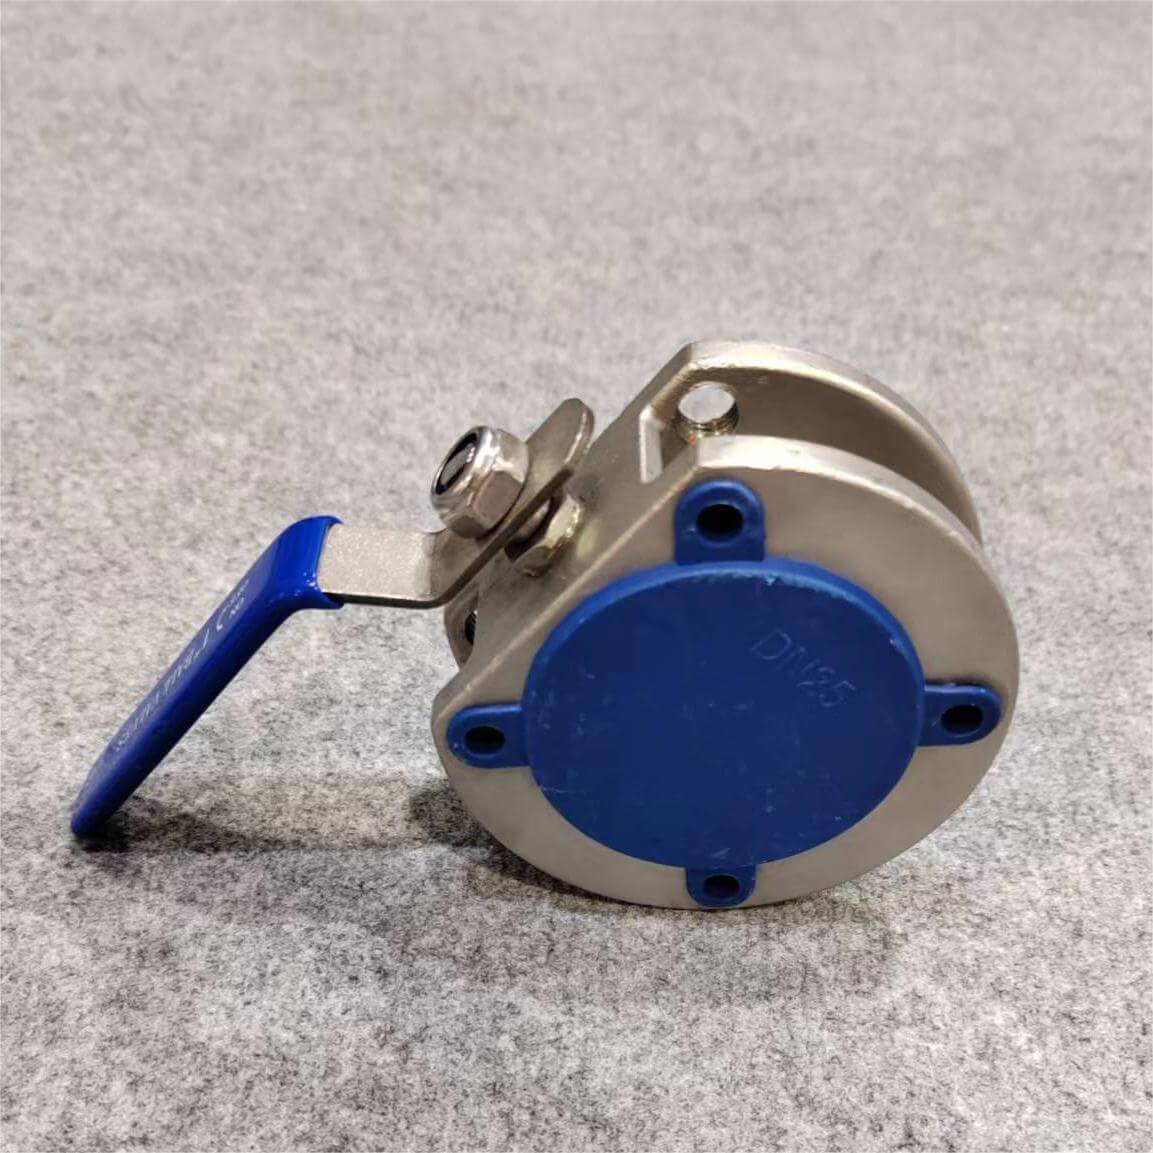 1pc wafer flanged ball valve with iso5211 mounting pad (侧面)